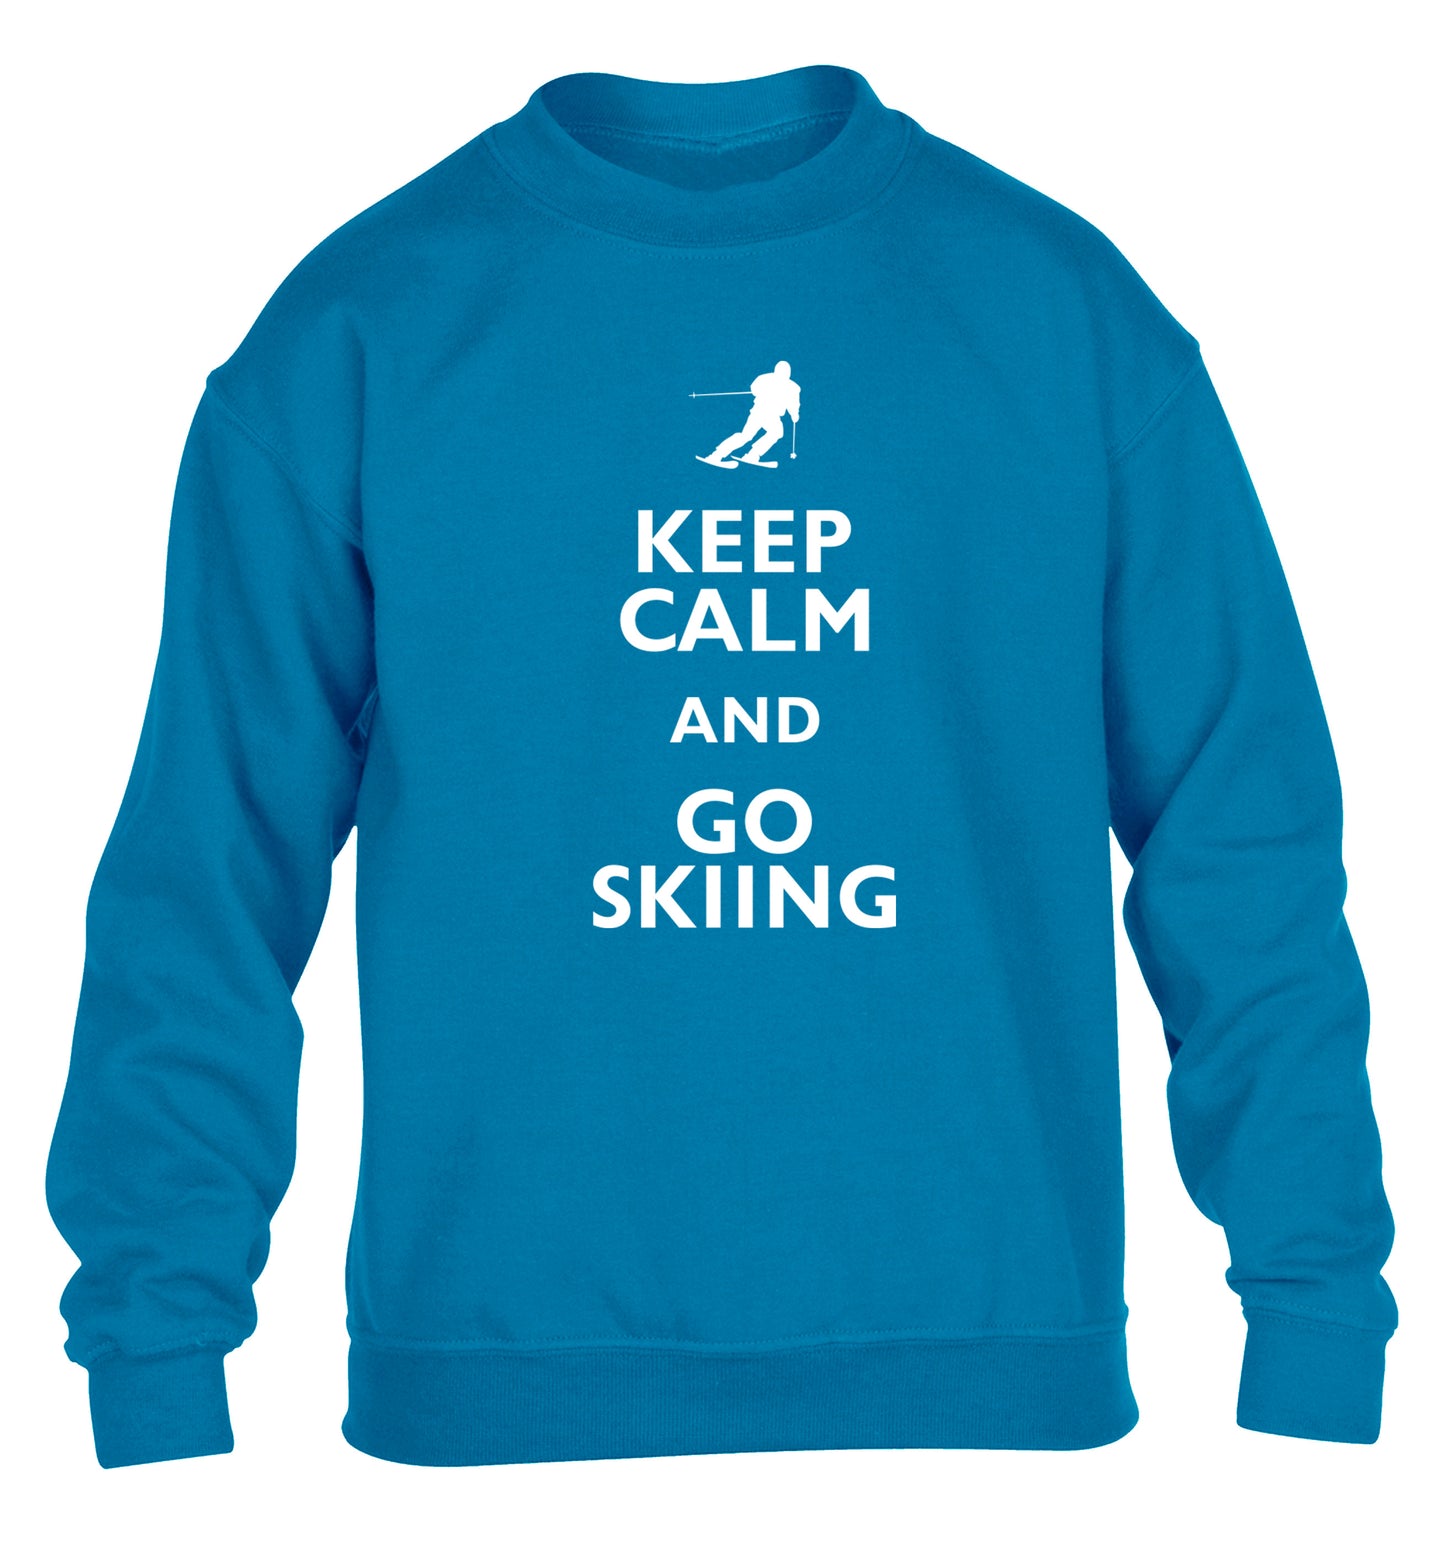 Keep calm and go skiing children's blue sweater 12-14 Years